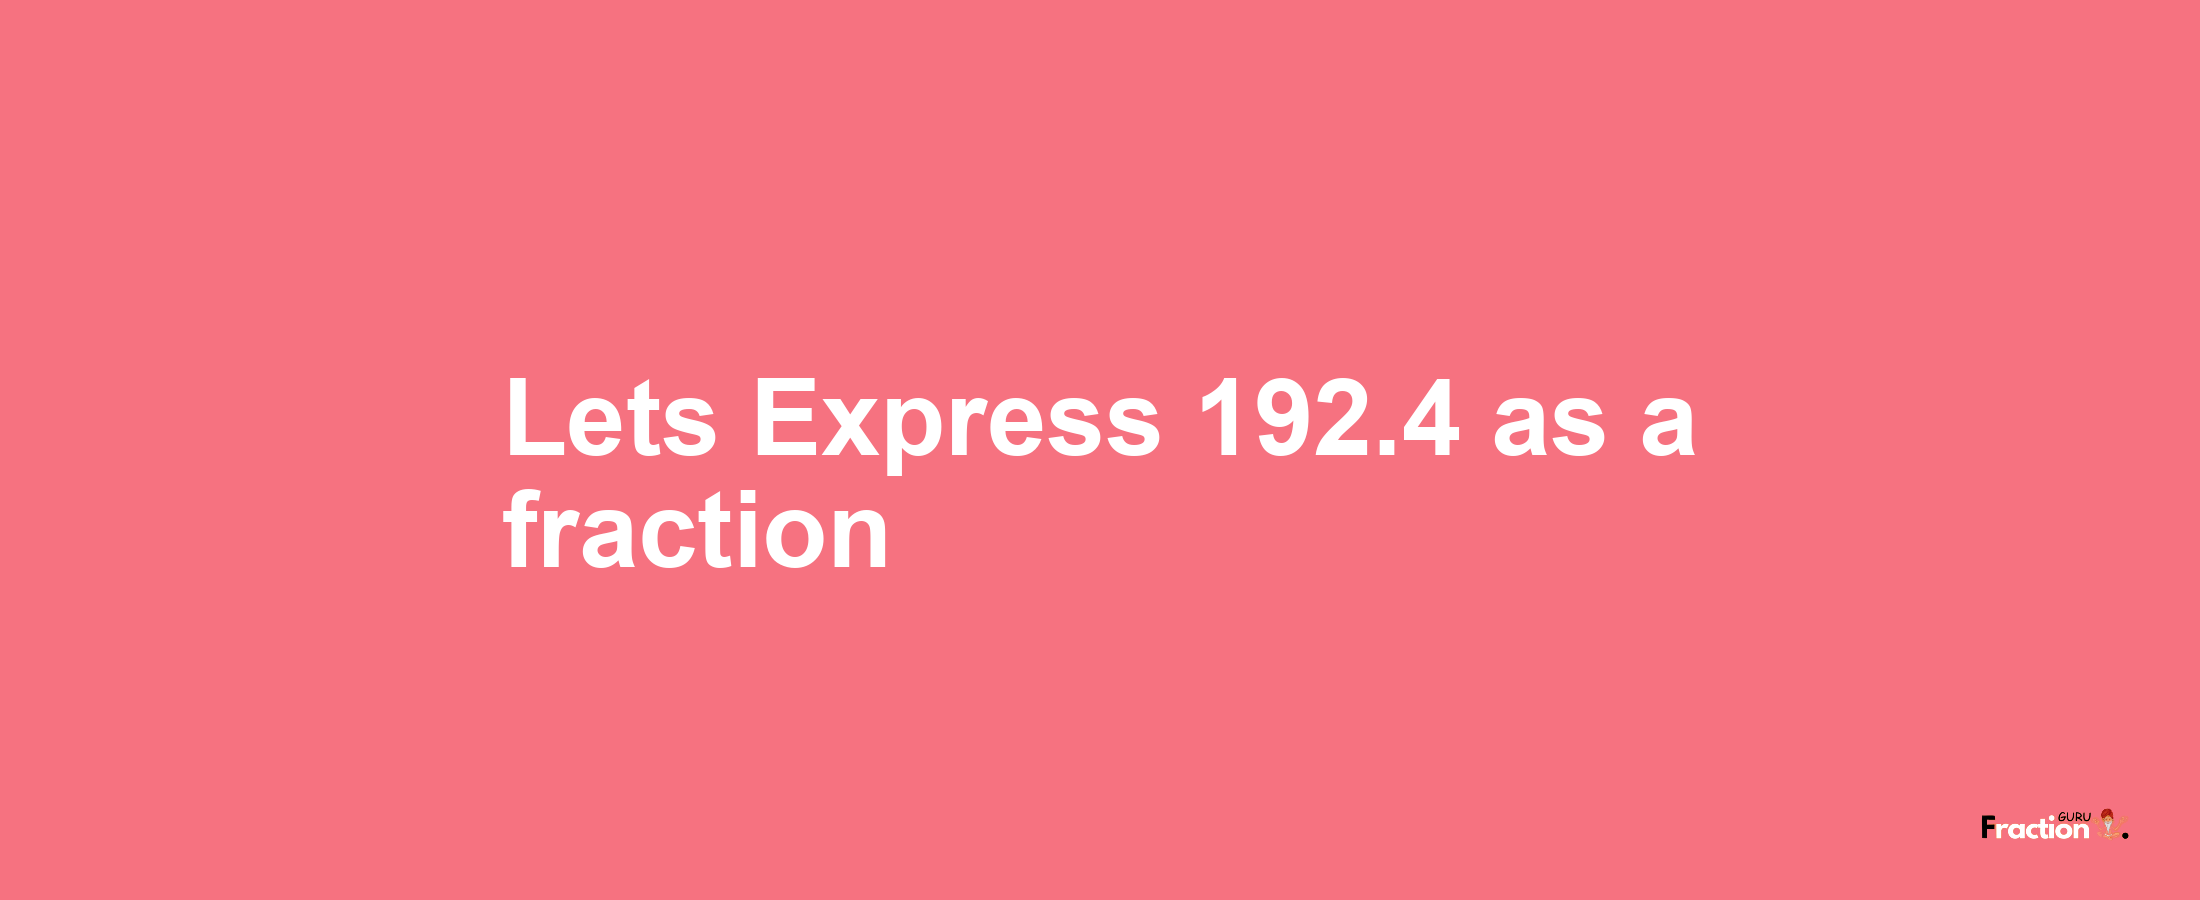 Lets Express 192.4 as afraction